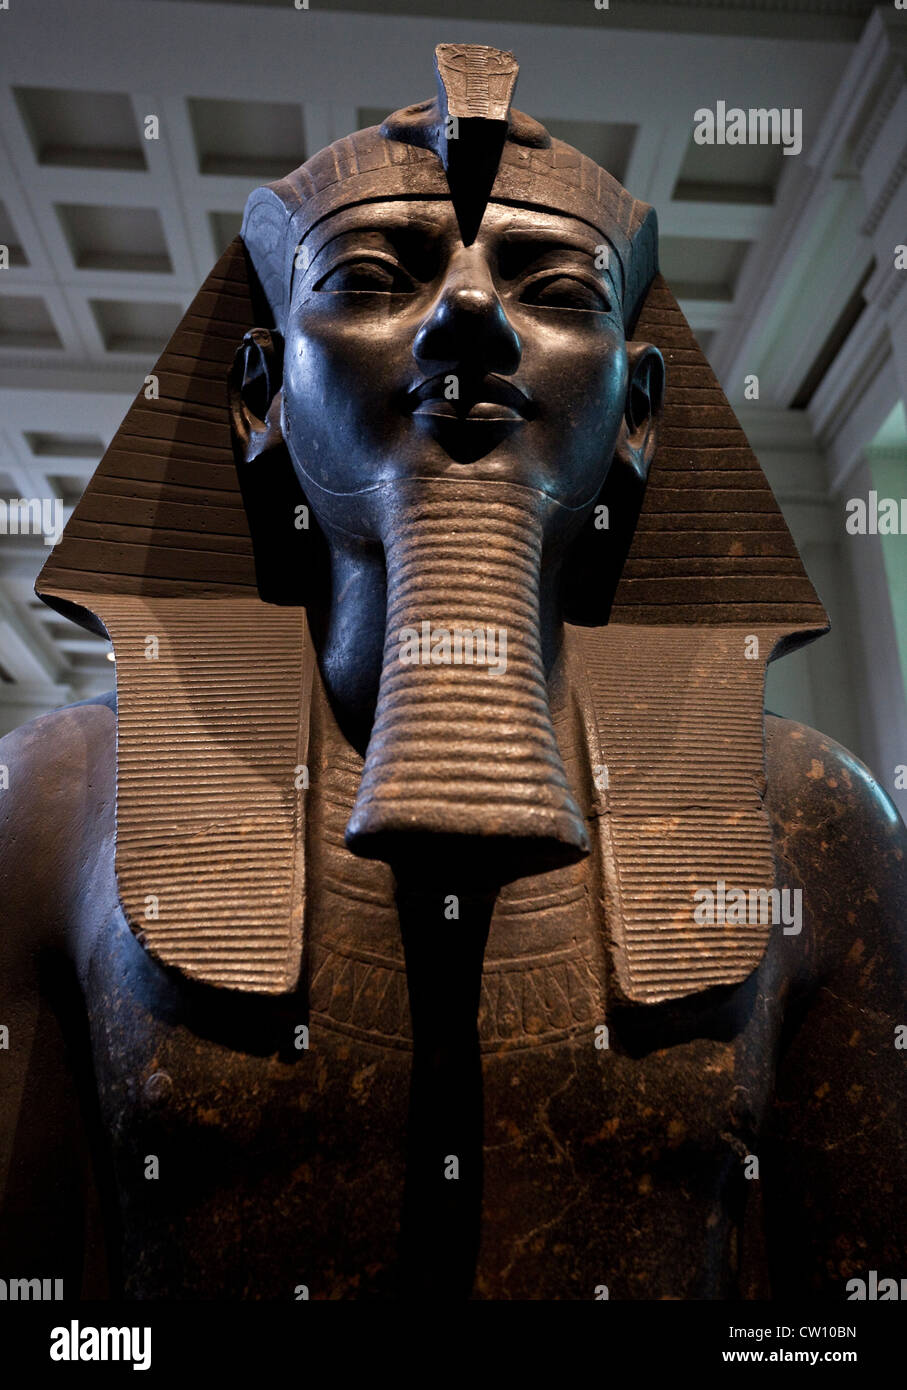 Top of a statue of the Egyptian pharaoh Amenhotep III, British Museum, London, England, UK. Stock Photo